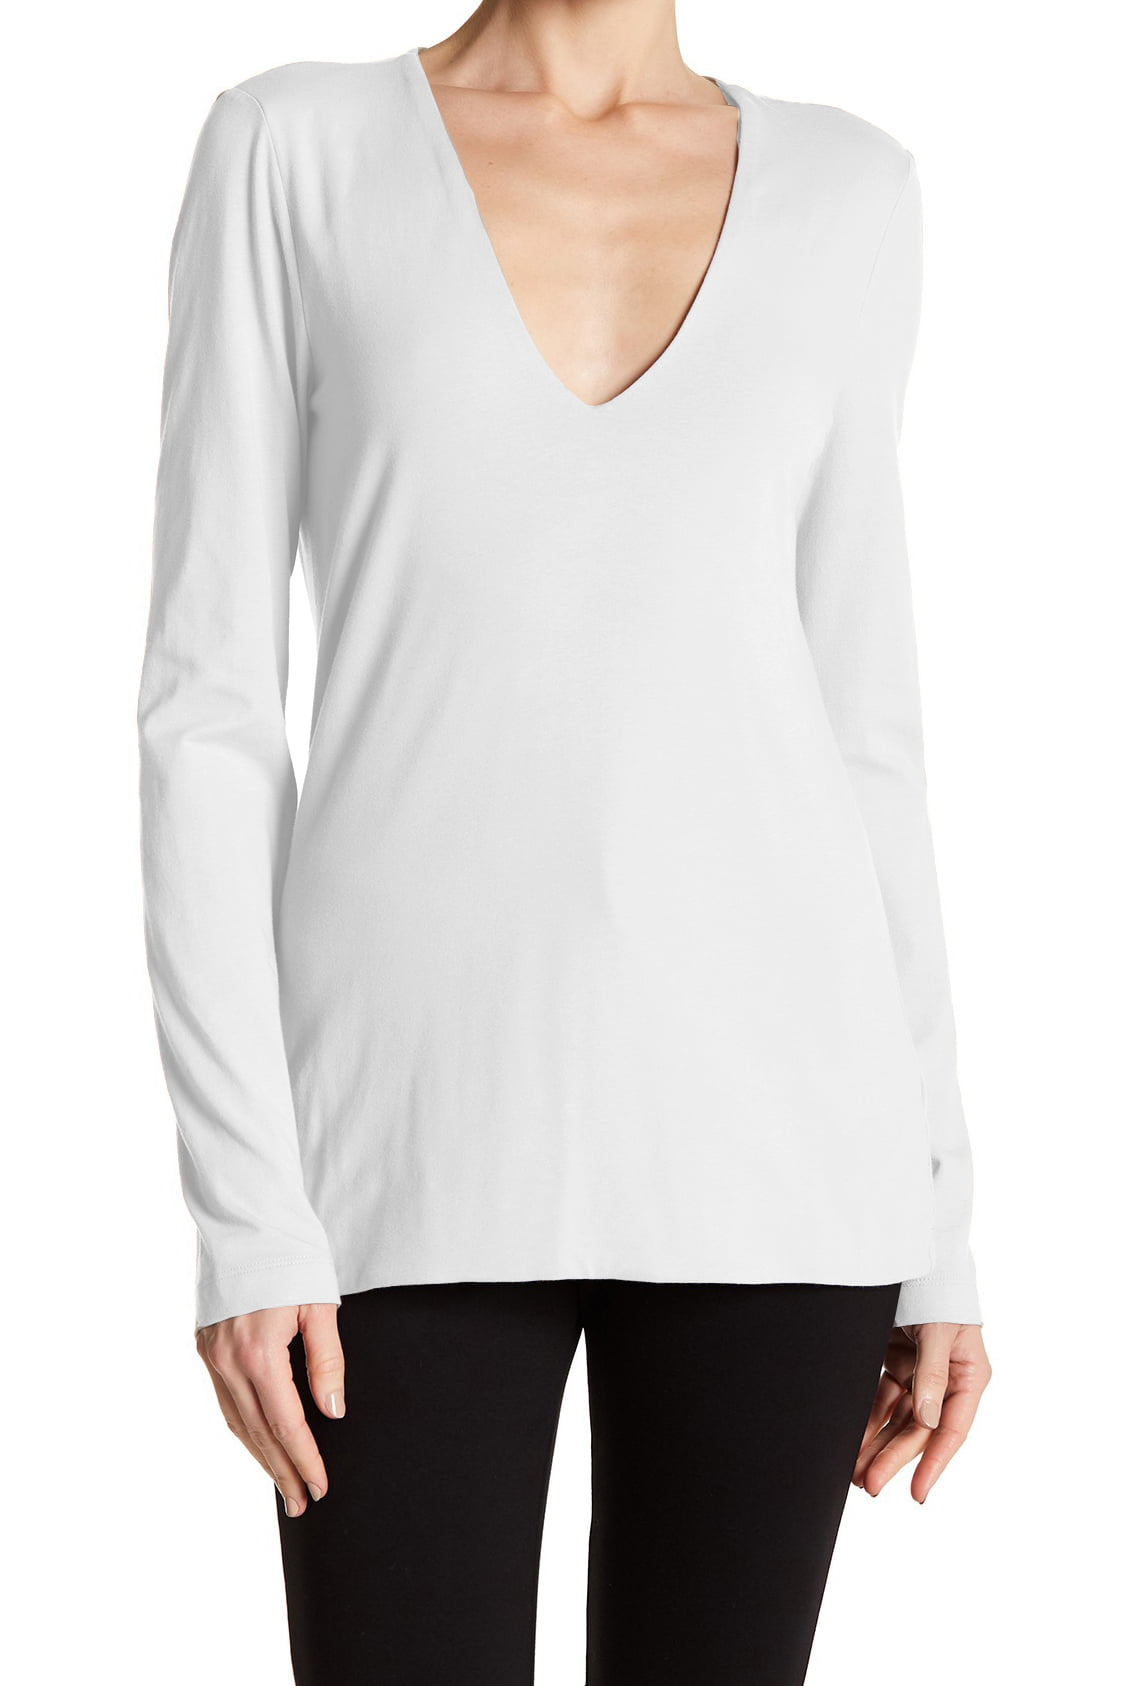 James Perse Chocolate V-Neck Long Sleeve T-Shirt